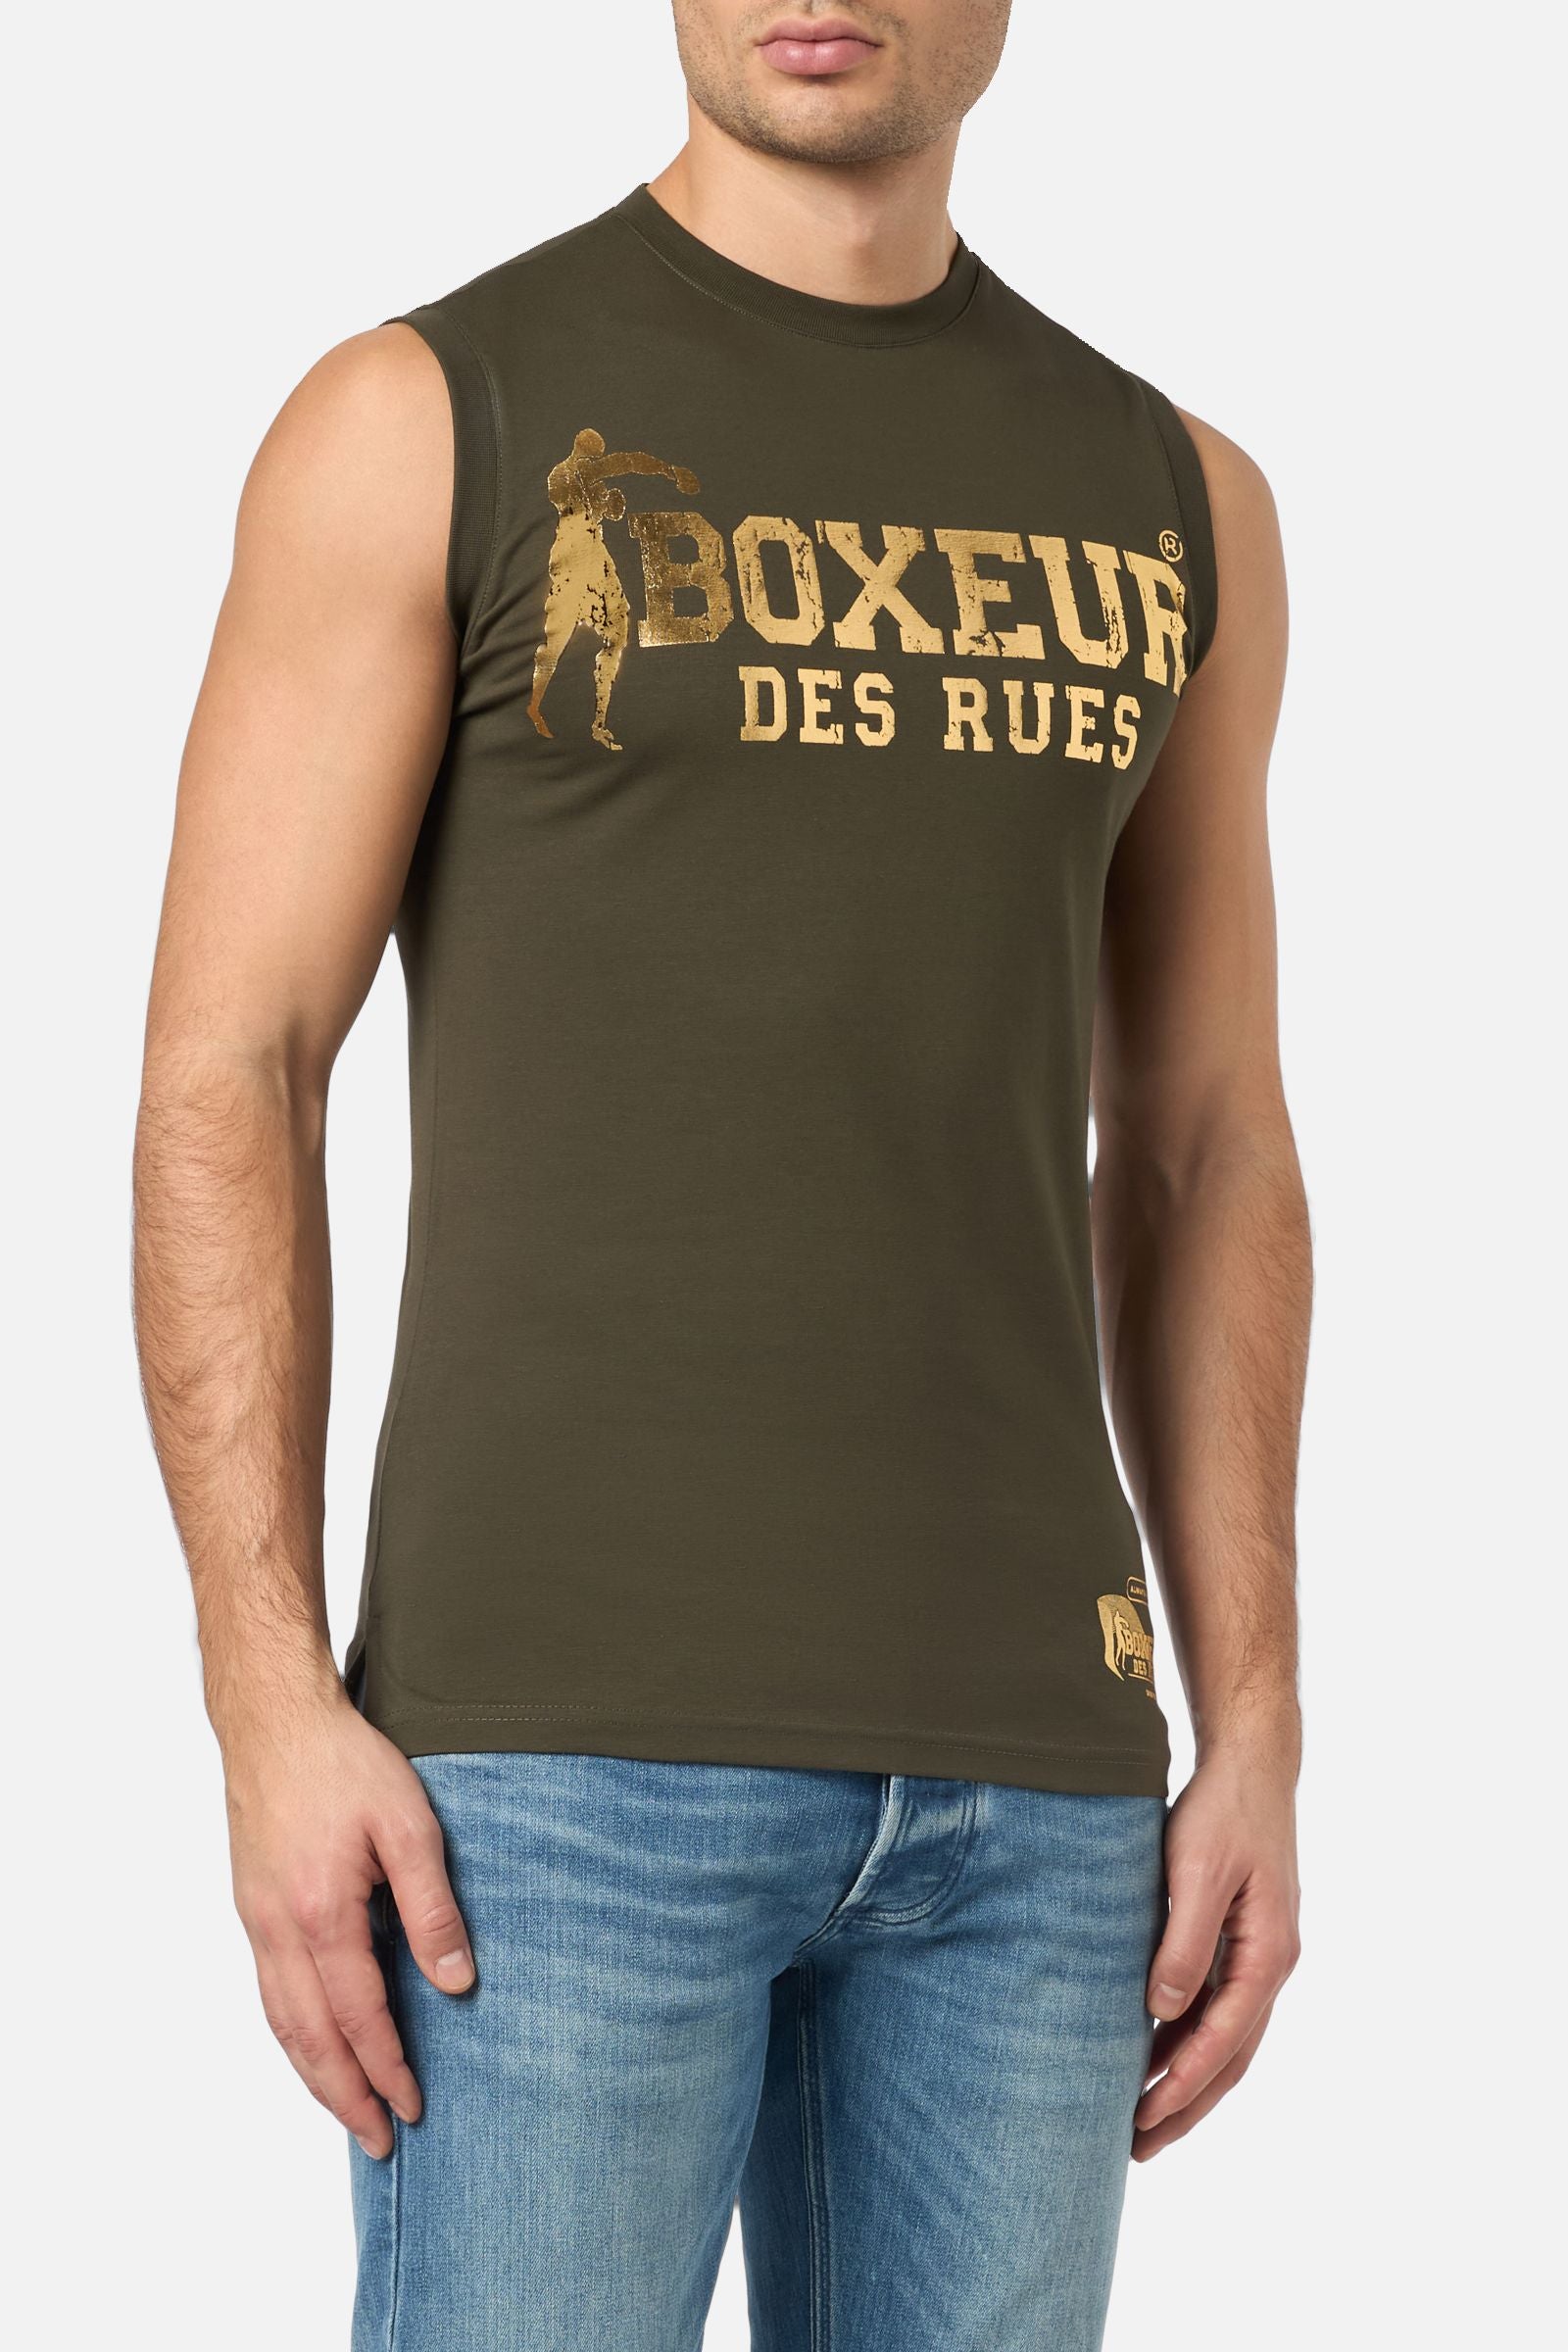 Basic Printed Tank Top in Army Tops Boxeur des Rues   